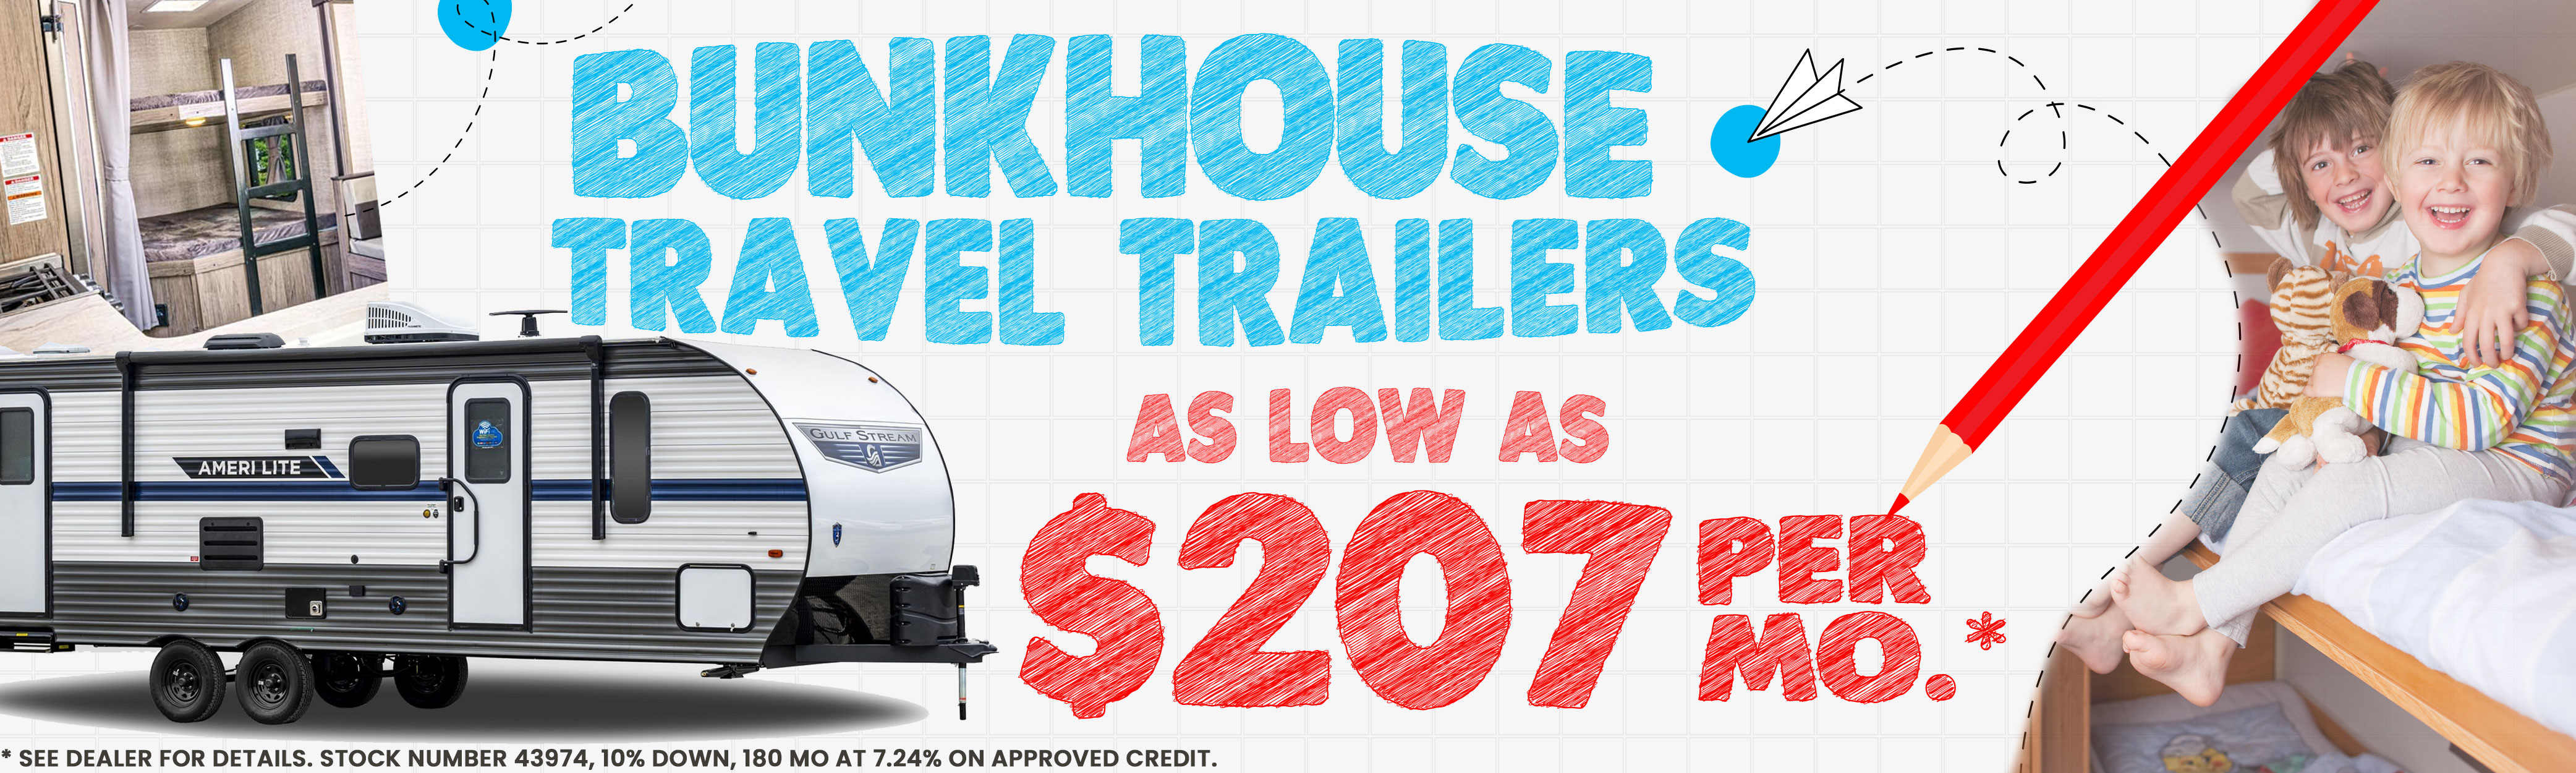 Bunkhouse Travel Trailers